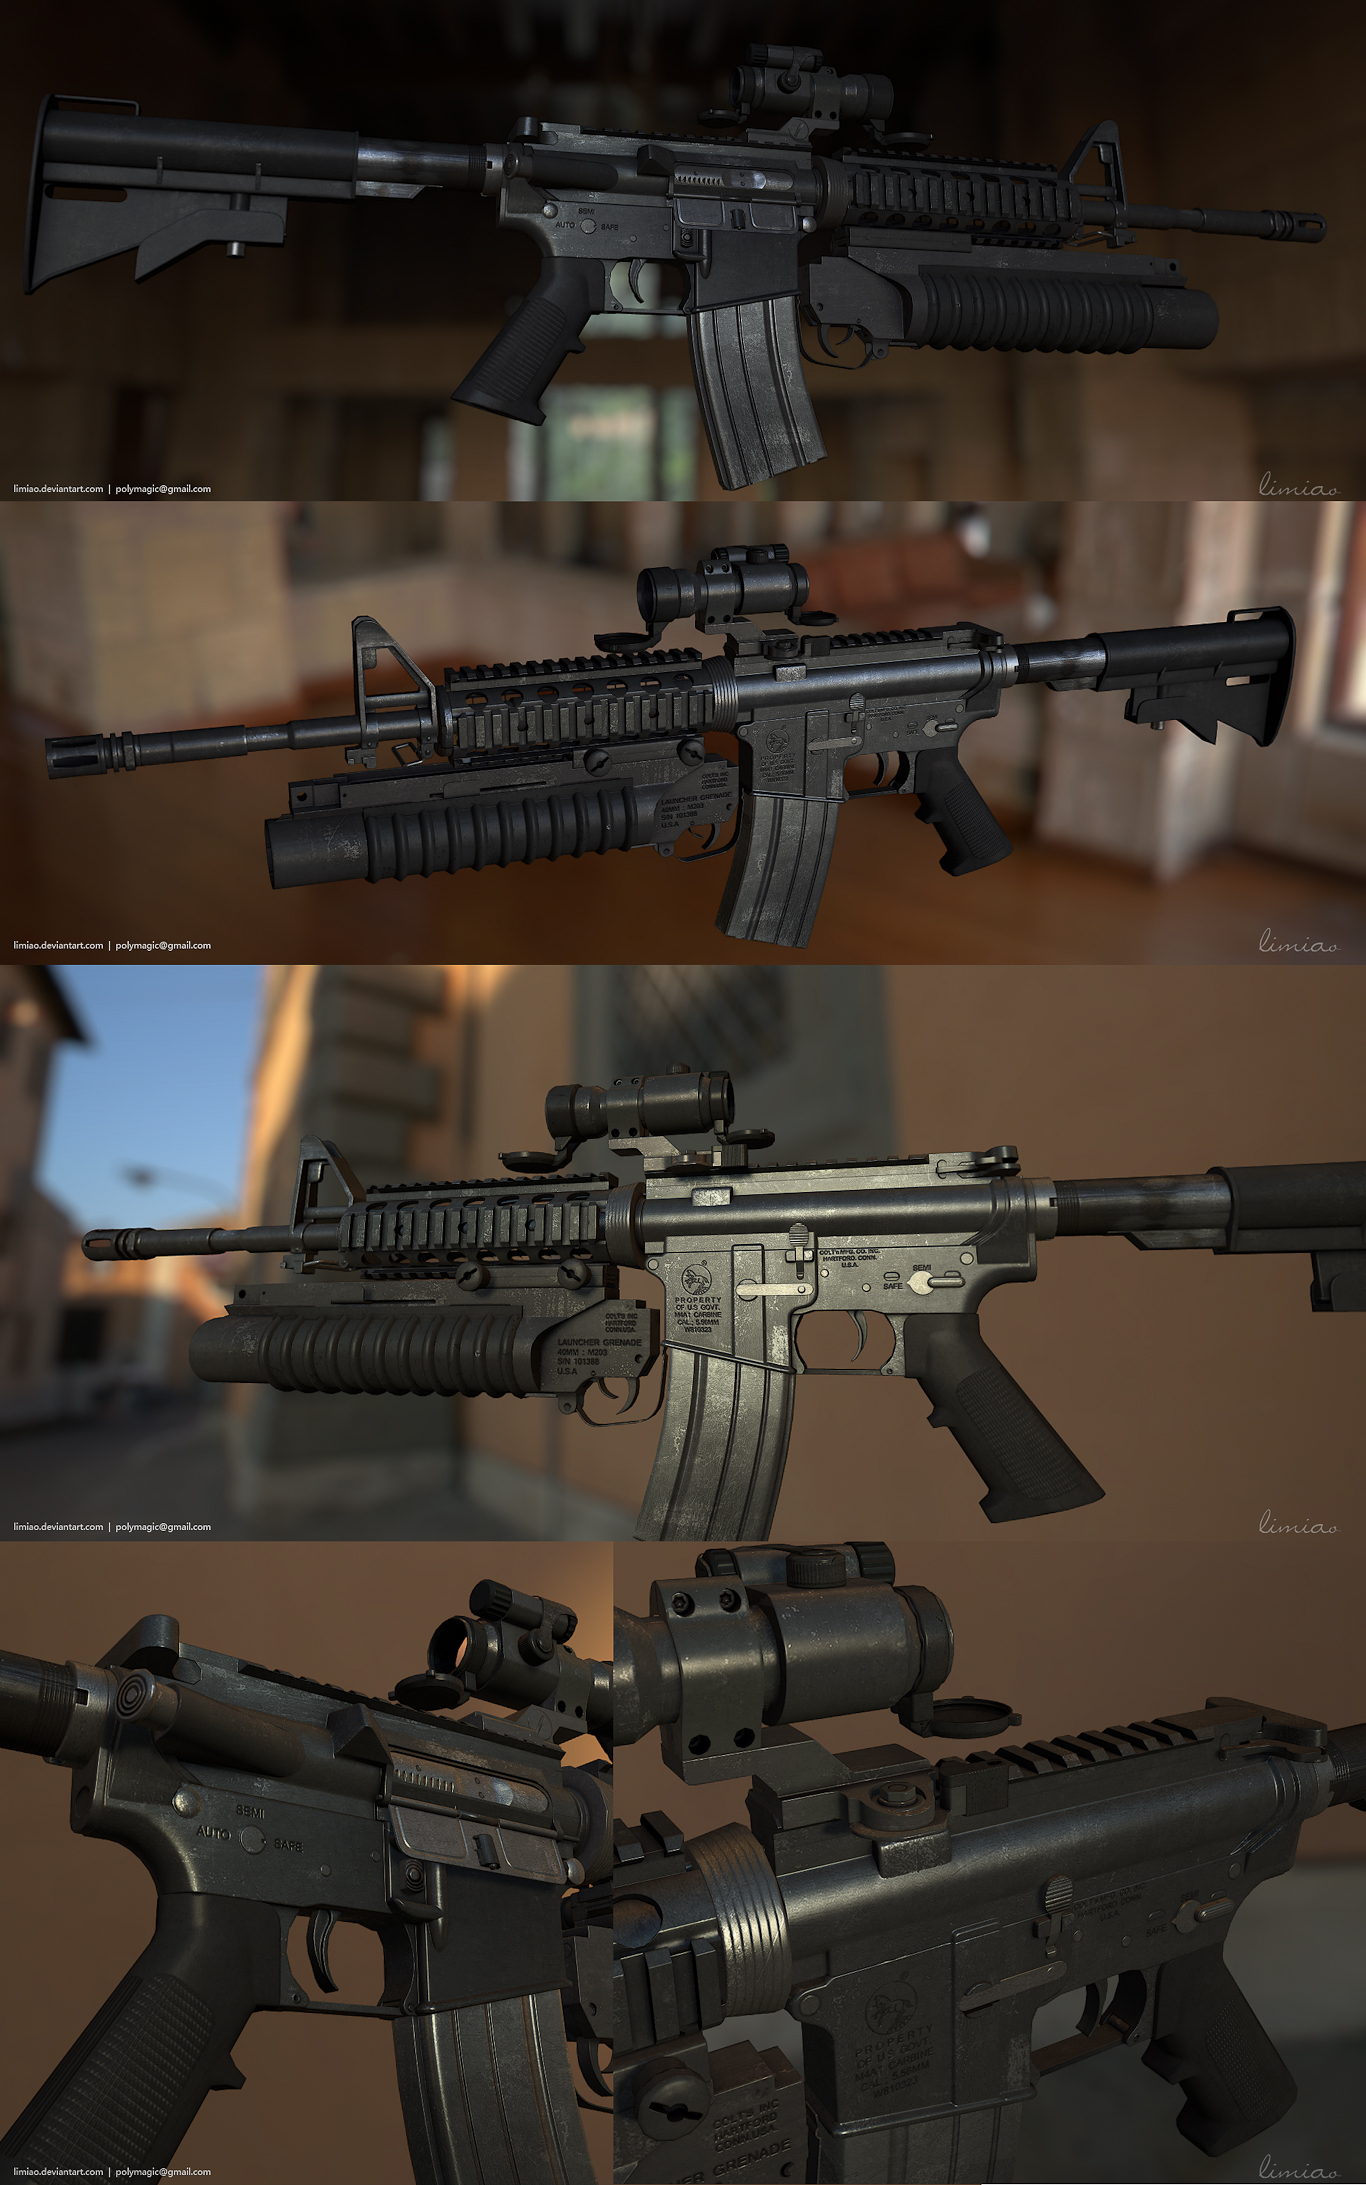 m4_carbine_game_model_re_render_by_limiao-d4fidle.jpg